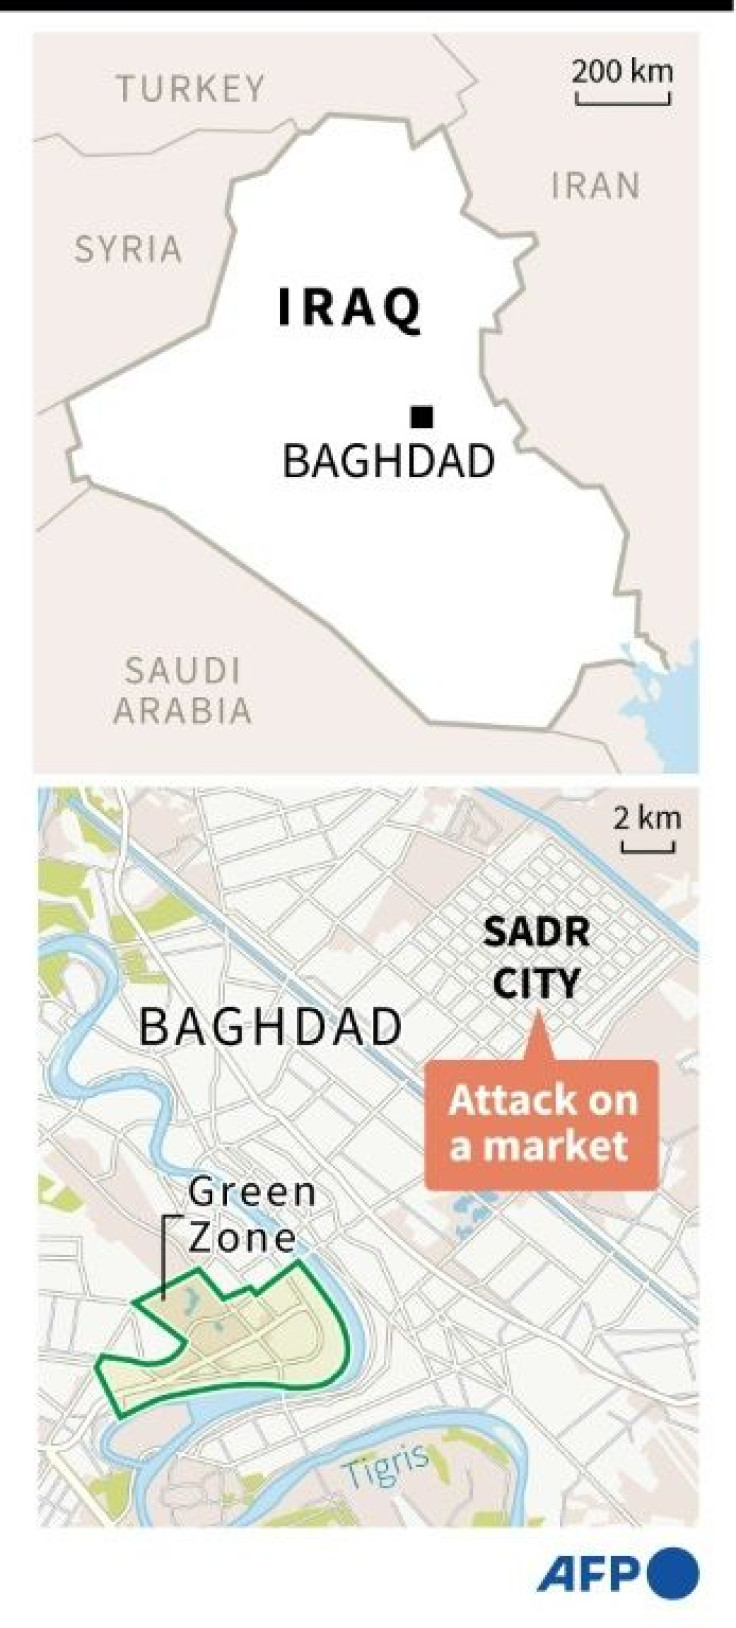 Map locating Sadr city in Baghdad, Iraq, where a fatal explosion occurred at a market.